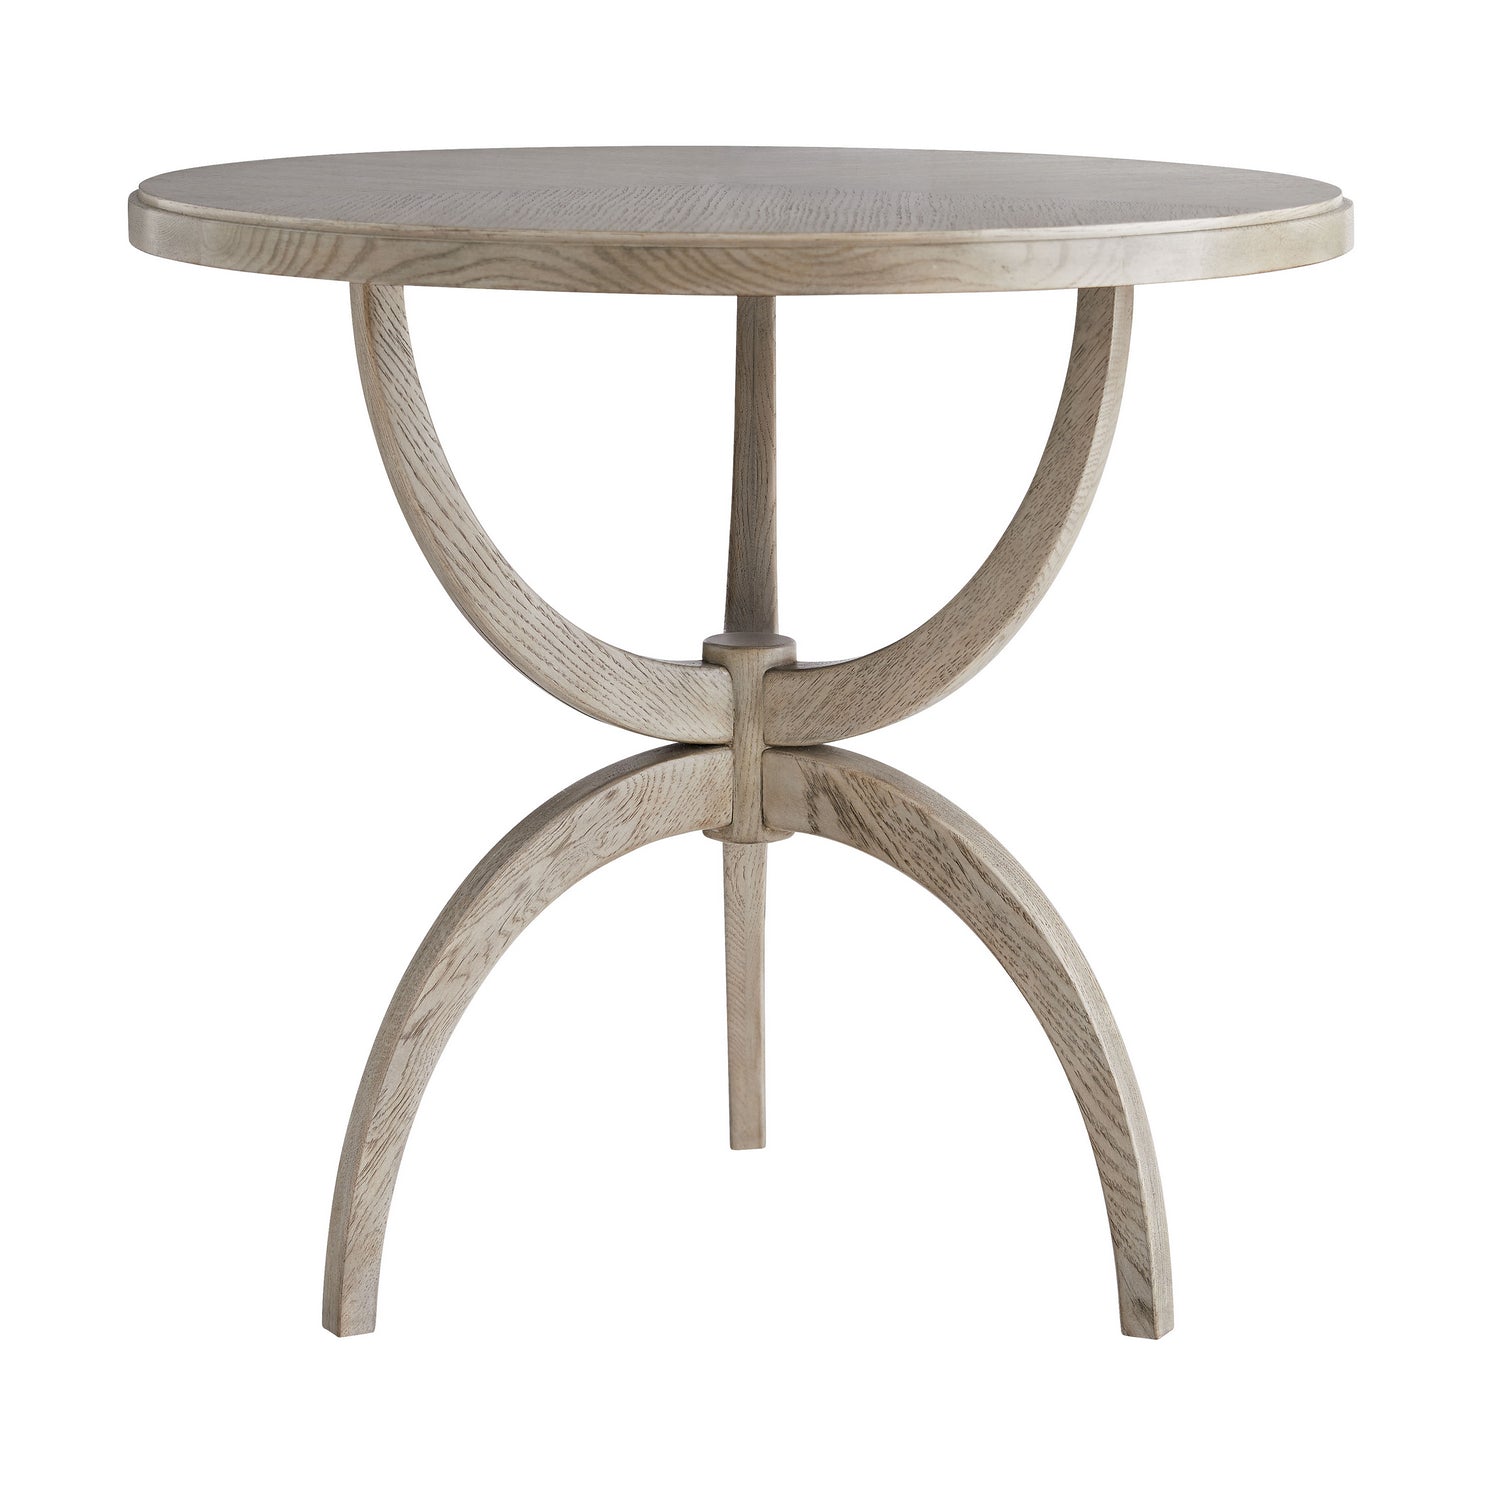 End Table from the Dorey collection in Smoke finish